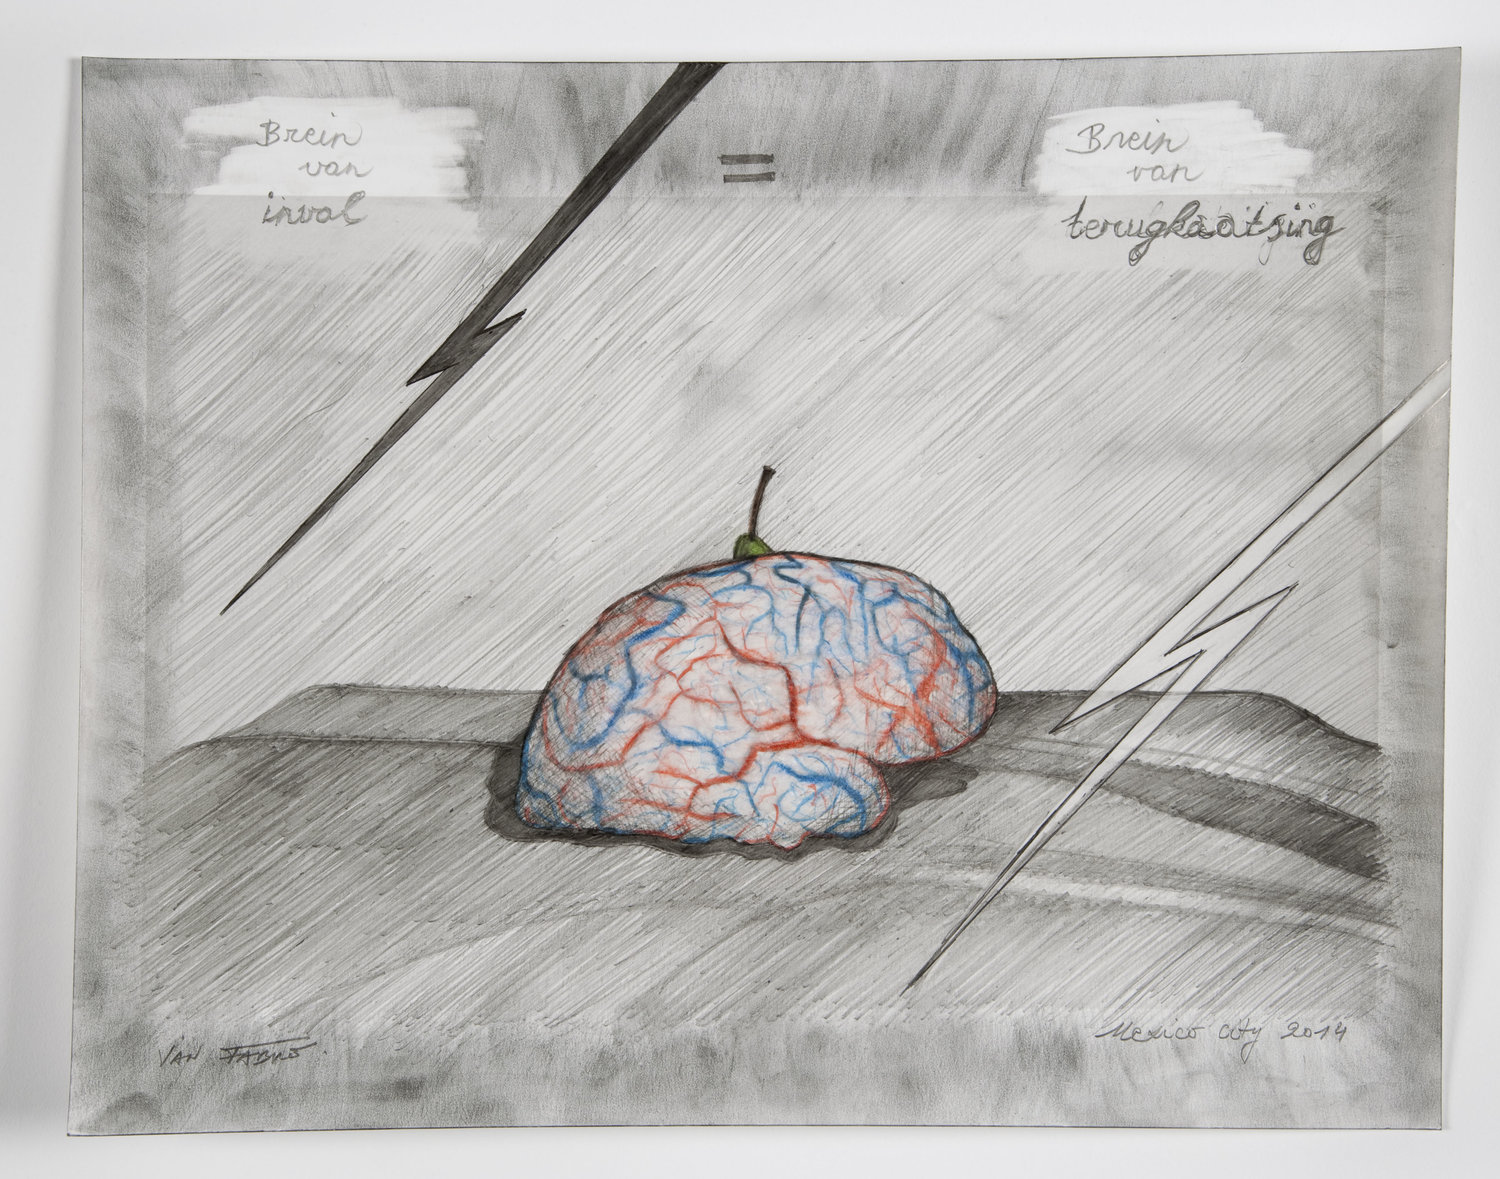 Jan Fabre, Brain of incidence = brain of reflection, 2014, HB pencil and colour pencil on photographic paper, 24x30.5 cm Photo Pat Verbruggen © Angelos bvba